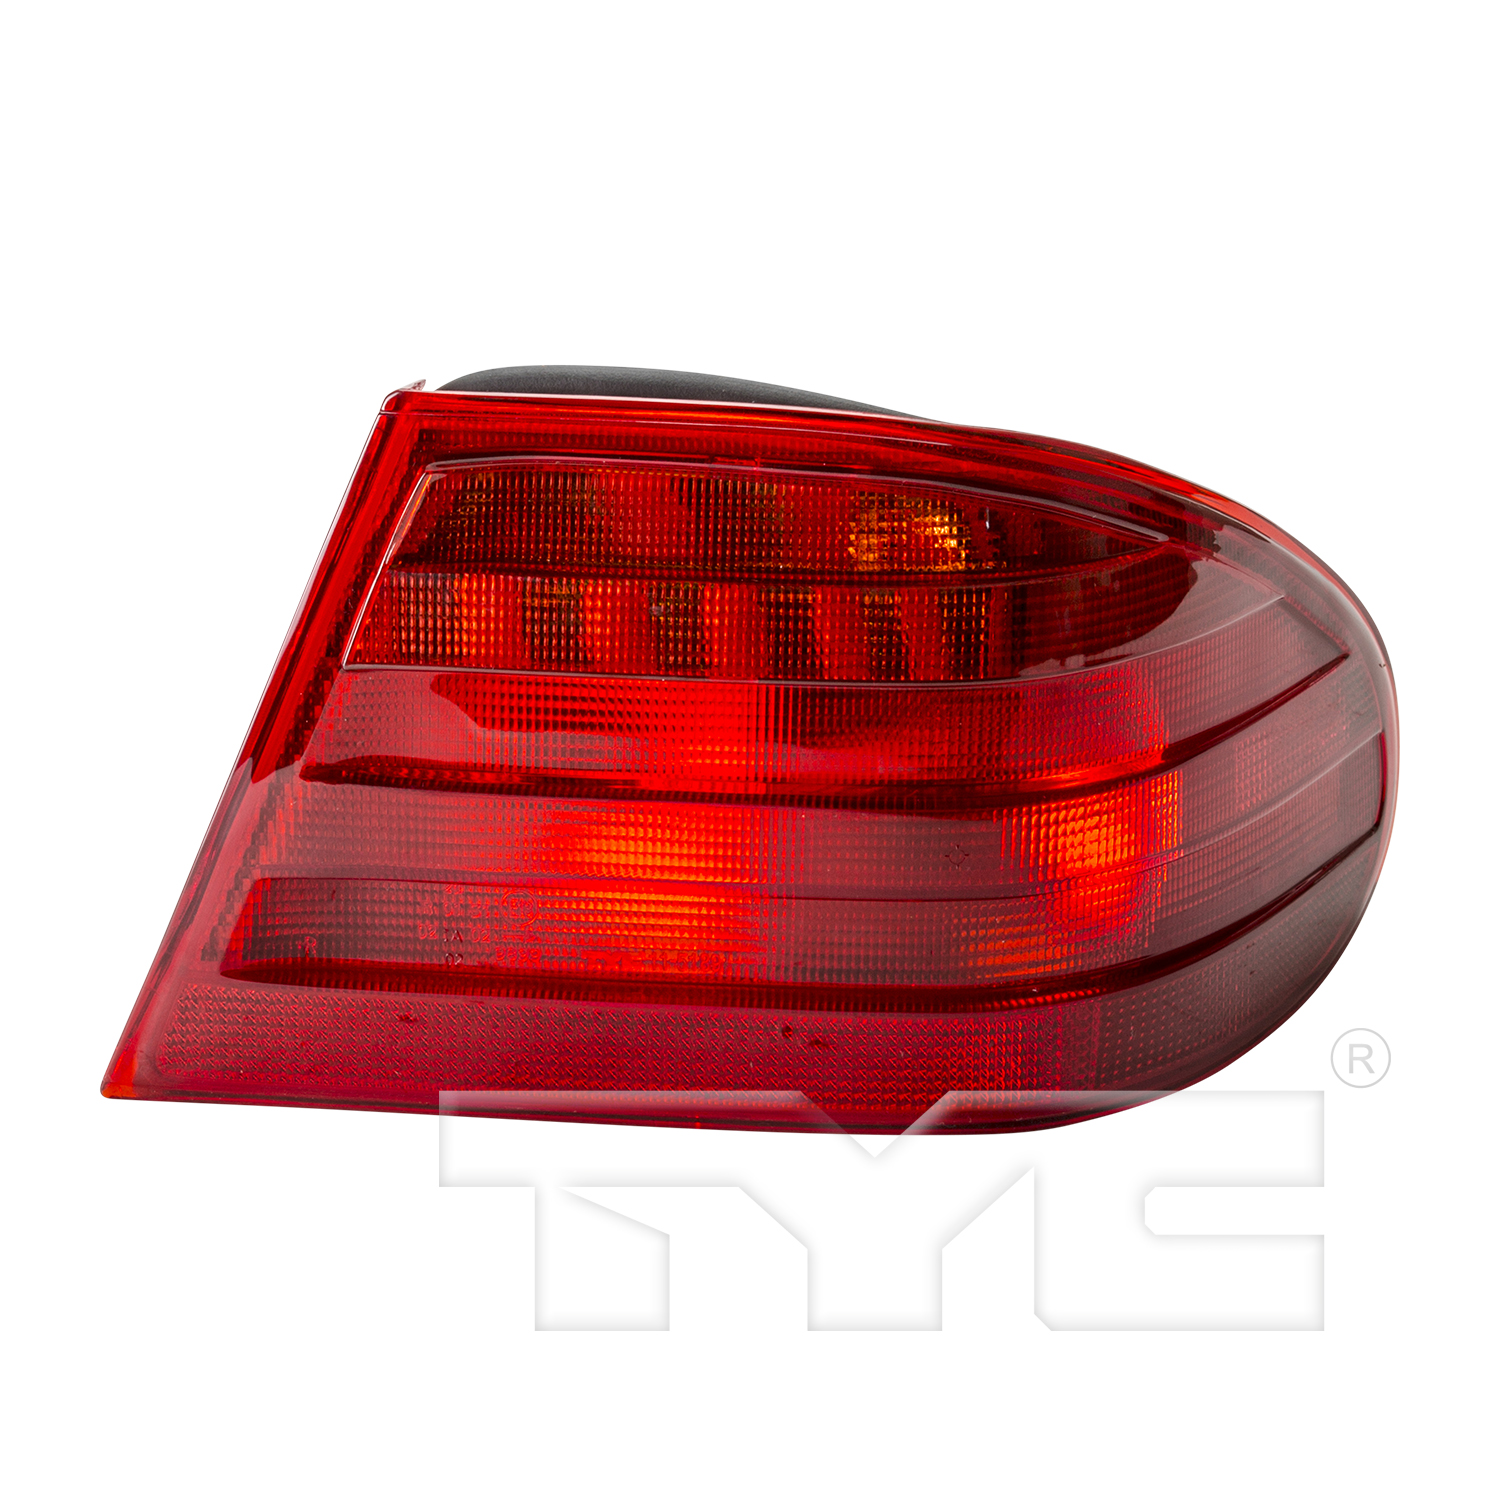 Aftermarket TAILLIGHTS for MERCEDES-BENZ - E420, E420,97-97,RT Taillamp assy outer